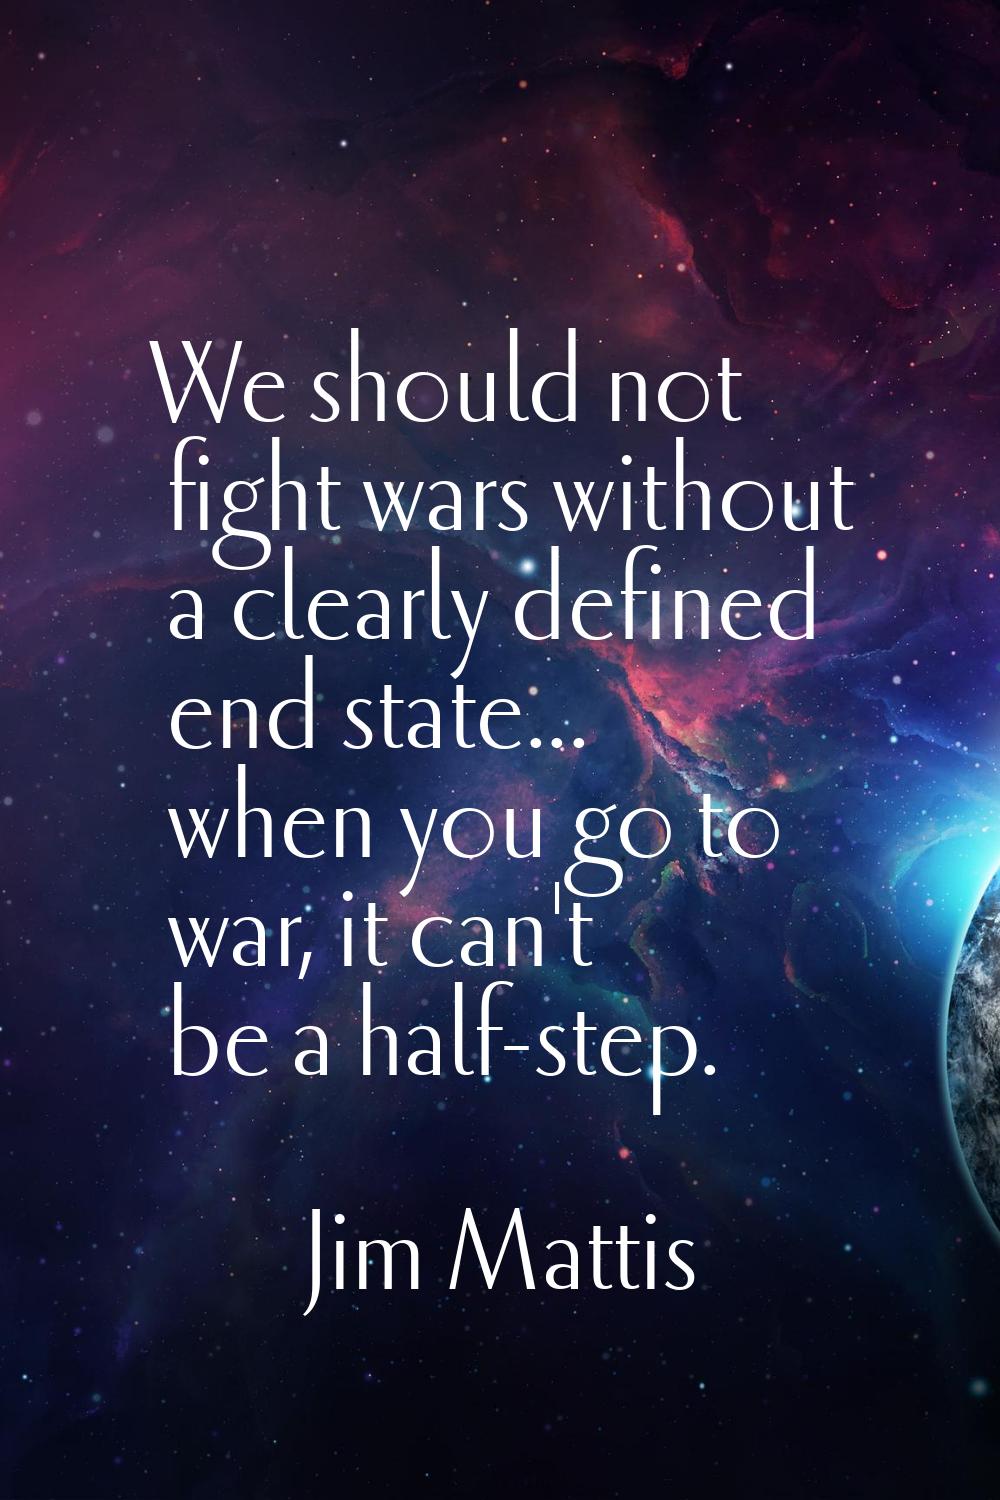 We should not fight wars without a clearly defined end state... when you go to war, it can't be a h